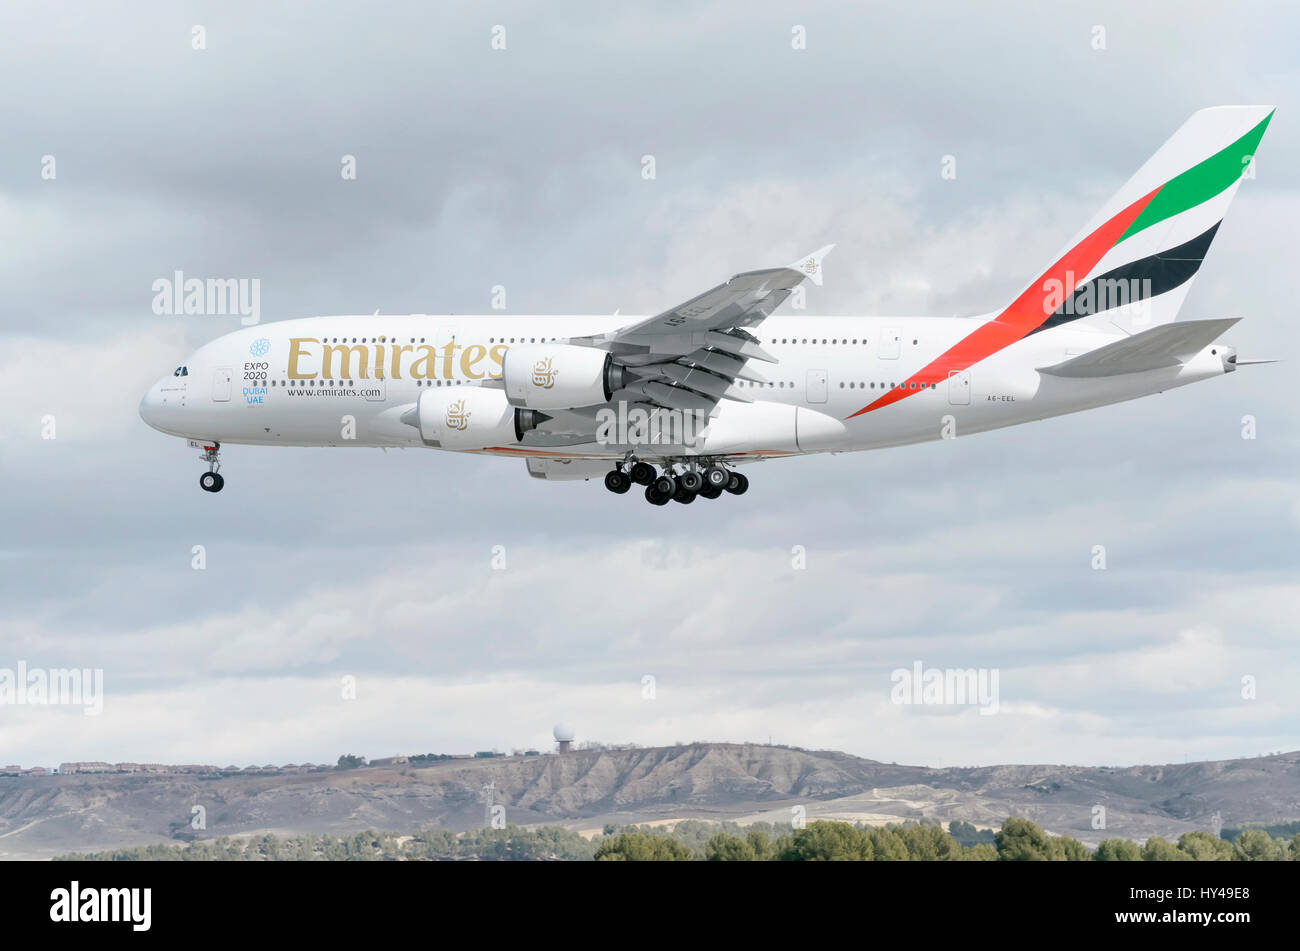 Plane Airbus A380, of Emirates airline, is landing in Madrid - Barajas, Adolfo Suarez airport. It's the world's largest passenger airliner. Clouds. Stock Photo